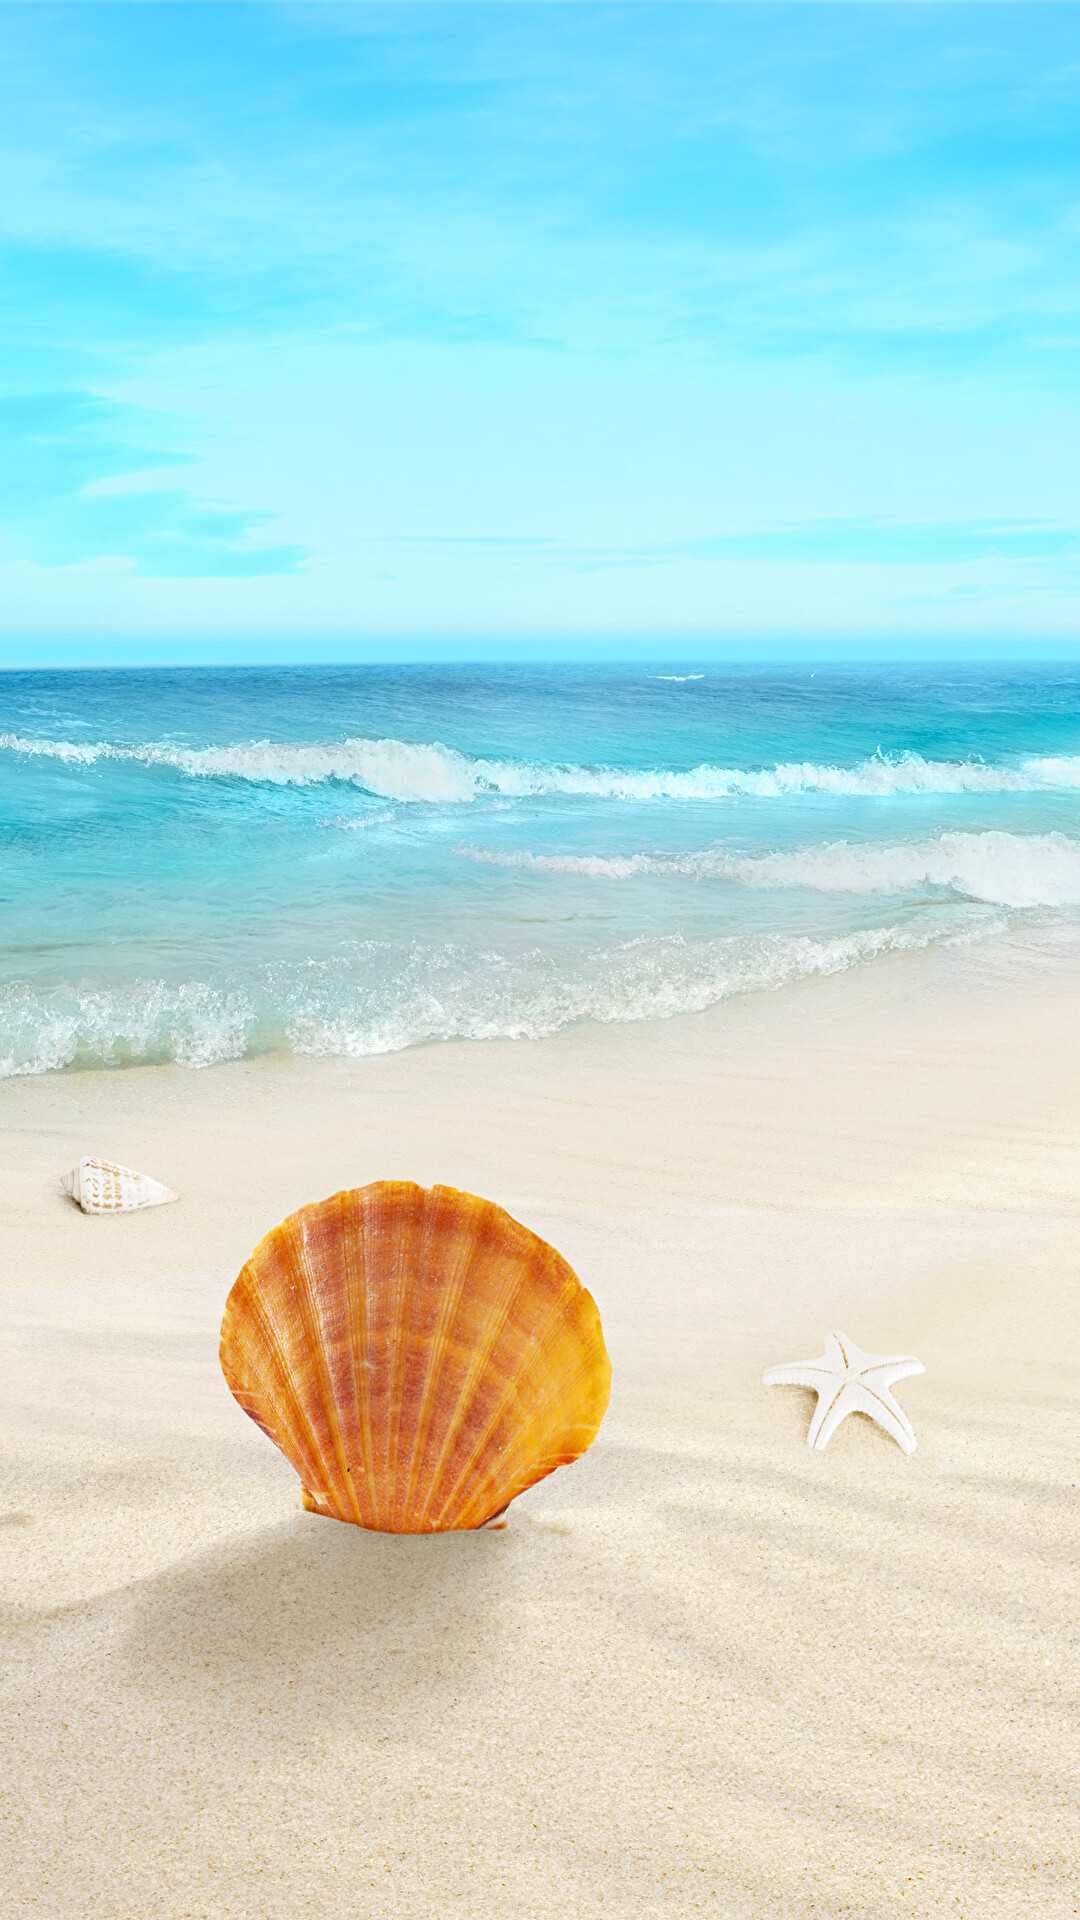 Starfish: Beach Wallpapers - Top Best Quality Beach Backgrounds ( HD, 4k ). 1080x1920 Full HD Background.